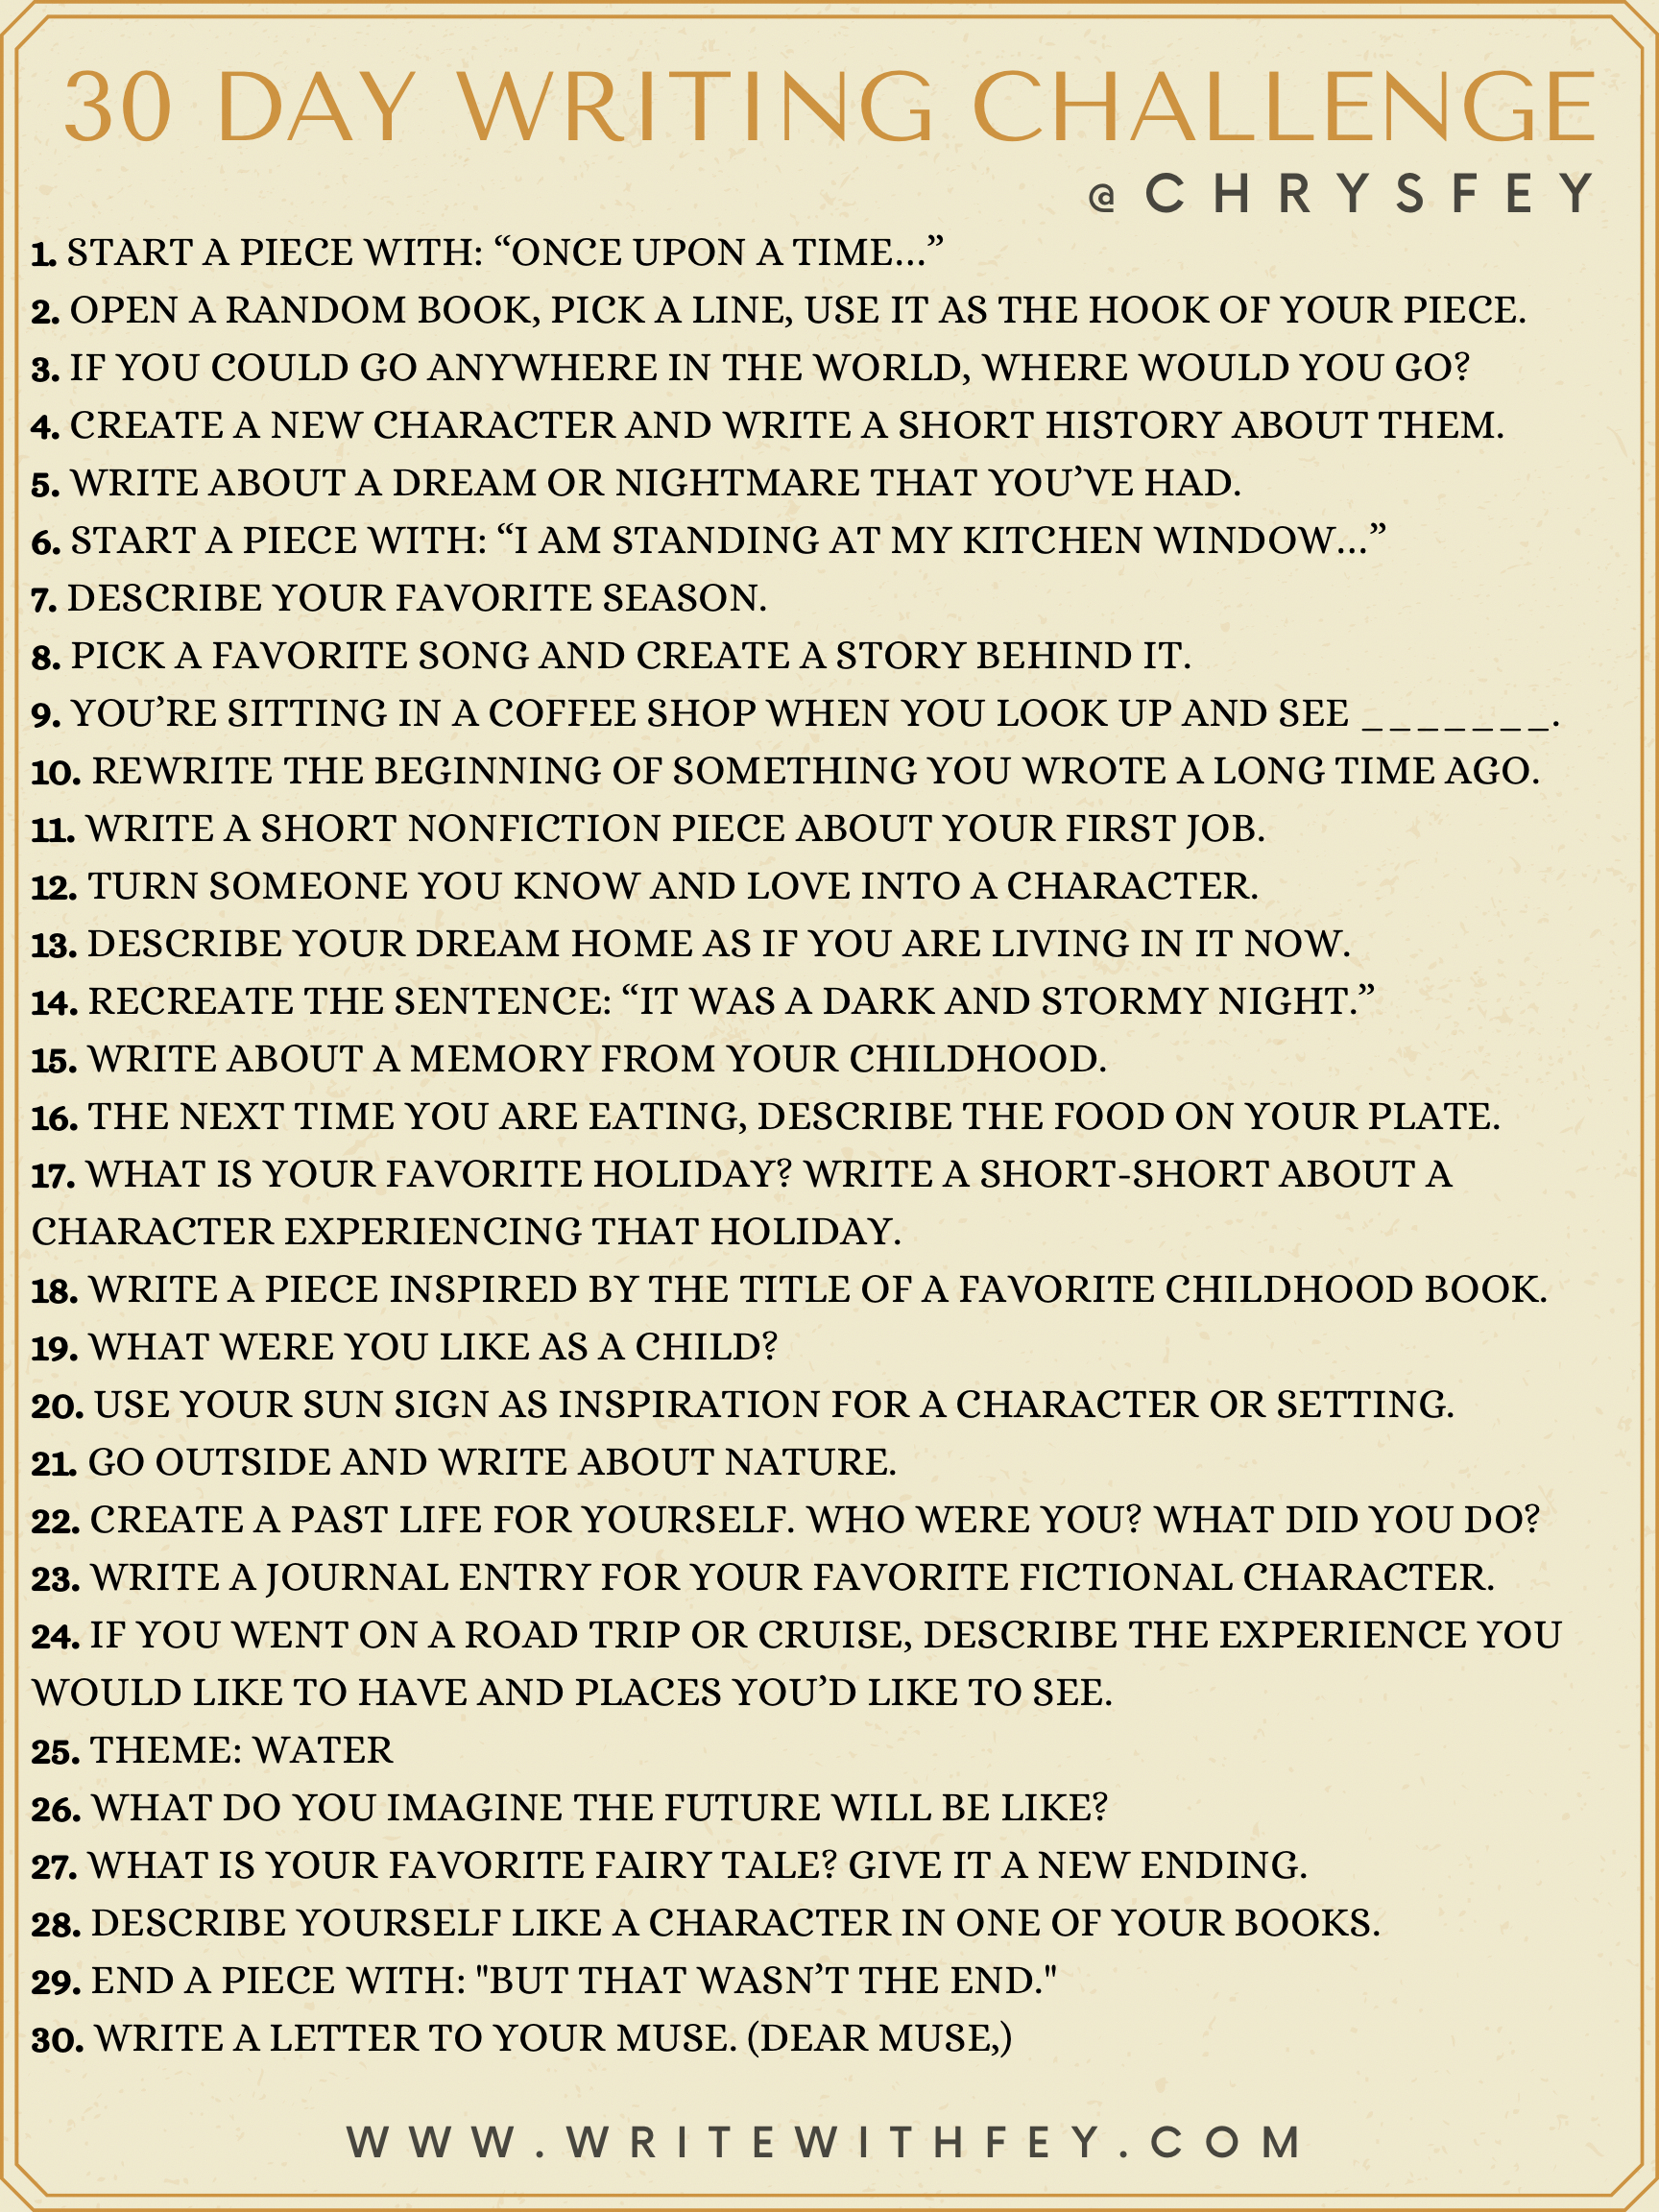 Write With Fey Chrys Fey’s 30 Day Writing Challenge